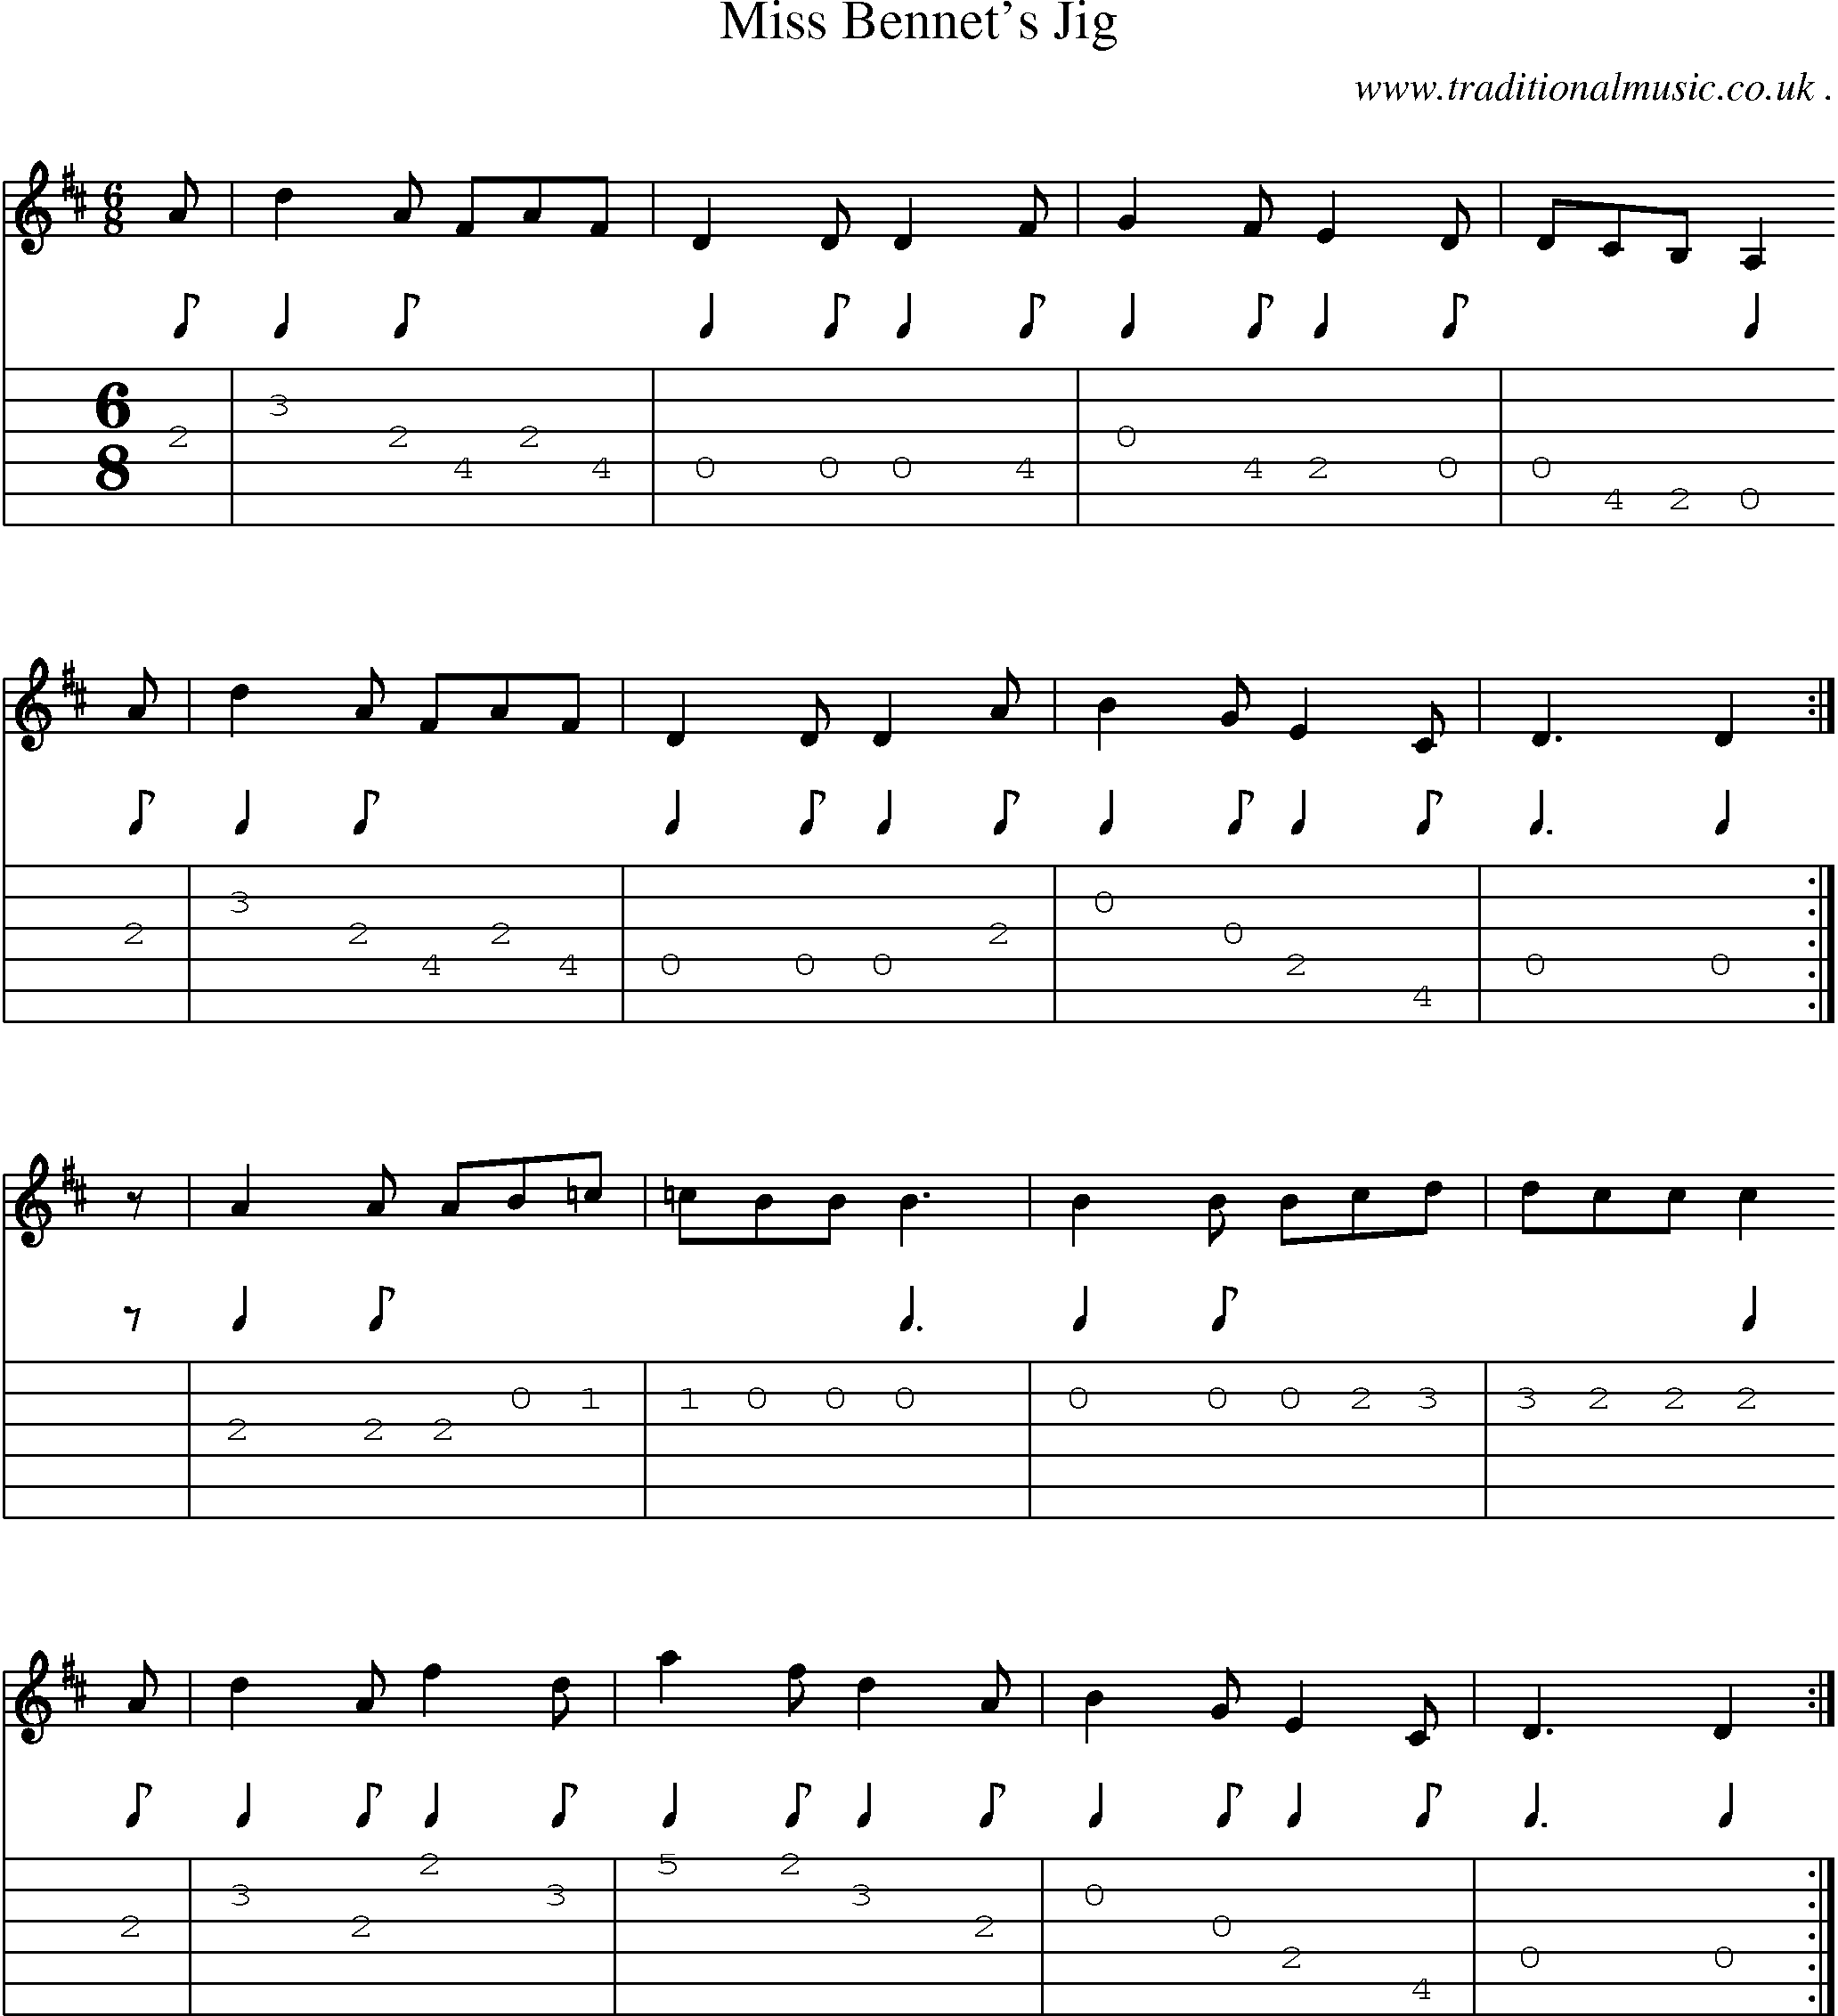 Sheet-music  score, Chords and Guitar Tabs for Miss Bennets Jig